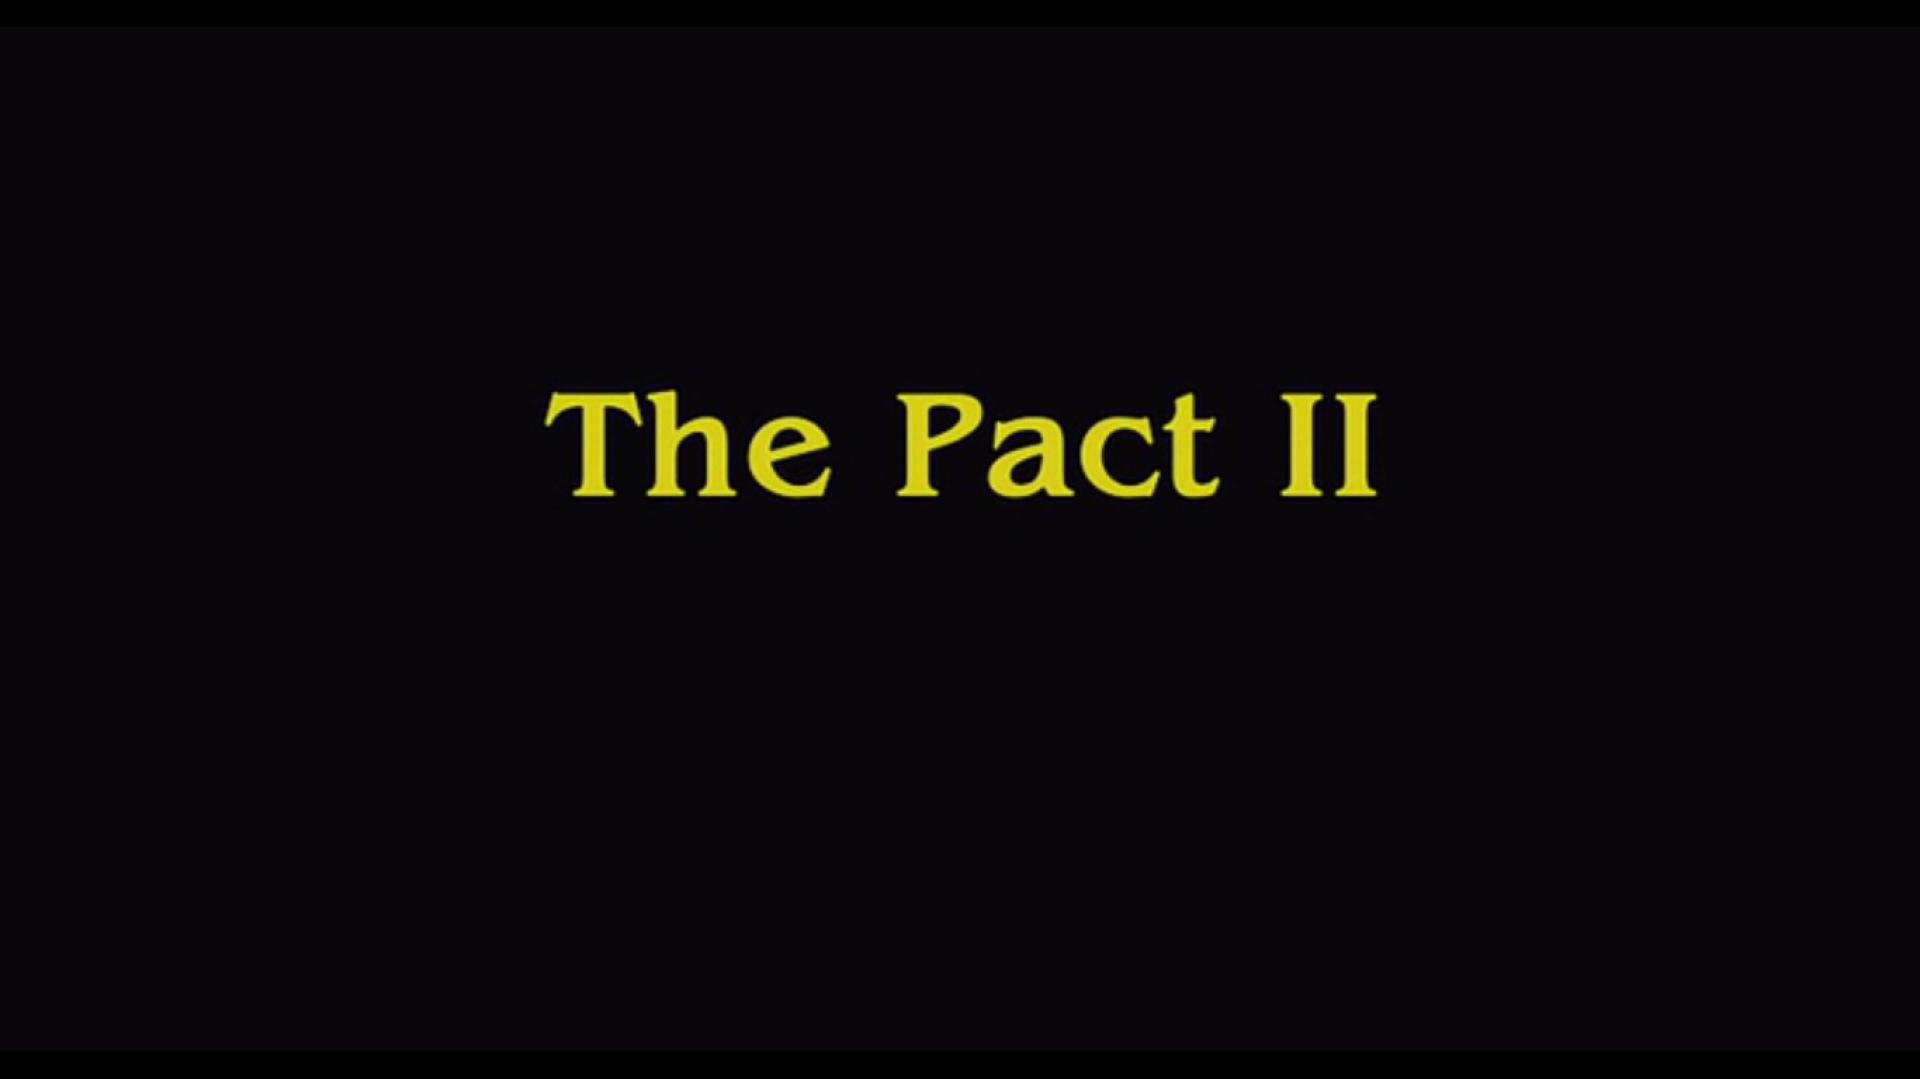 The Pact 2 (2014)